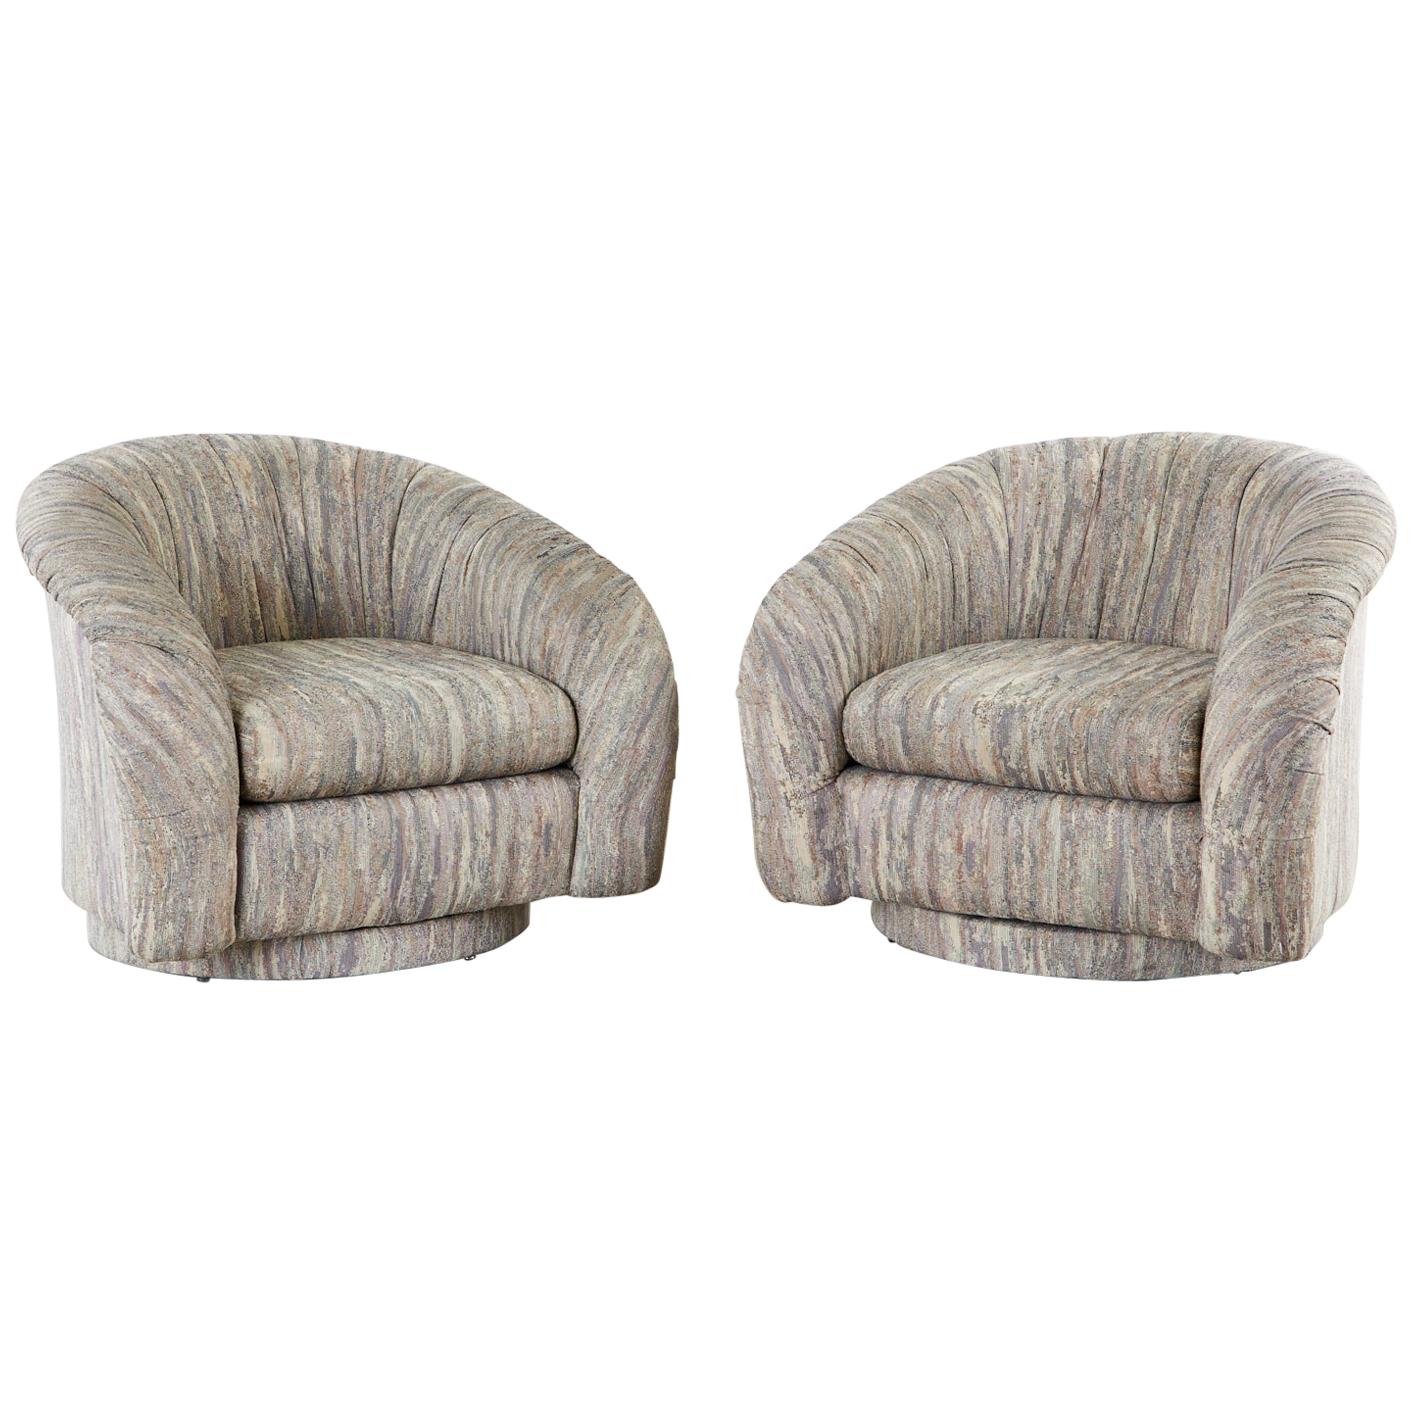 Pair of Milo Baughman Style Swivel Lounge or Club Chairs